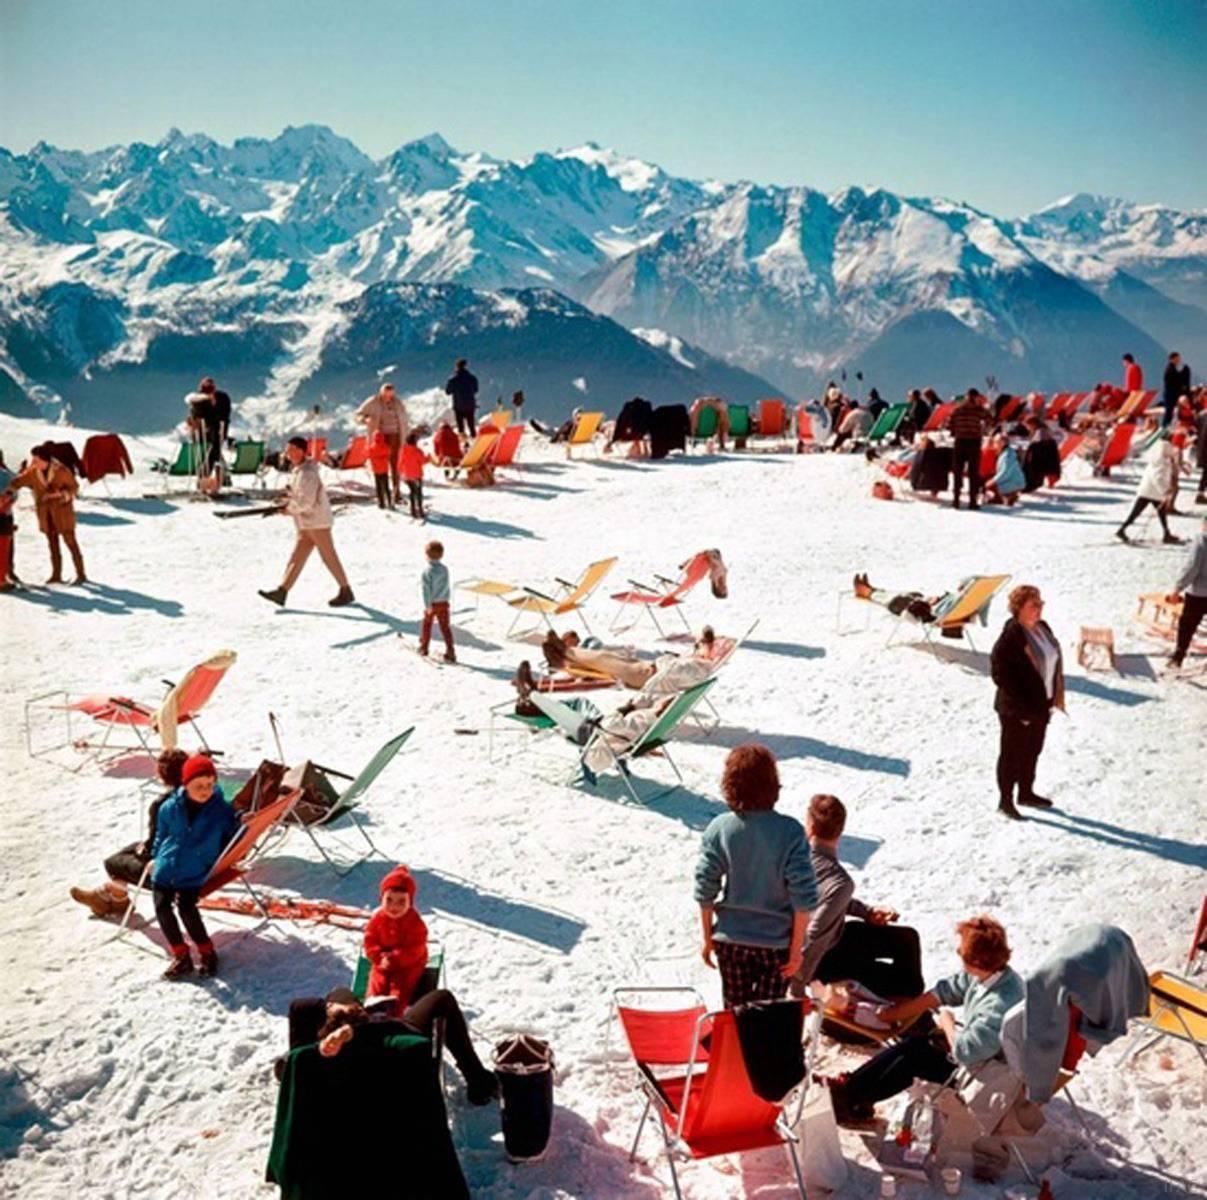 Verbier Vacation
1964
C print
Estate edition of 150. 

Holiday-makers take the sun on a mountain top in Verbier, 1964

Estate stamped and hand numbered edition of 150 with certificate of authenticity from the estate. 

Slim Aarons (1916-2006) worked